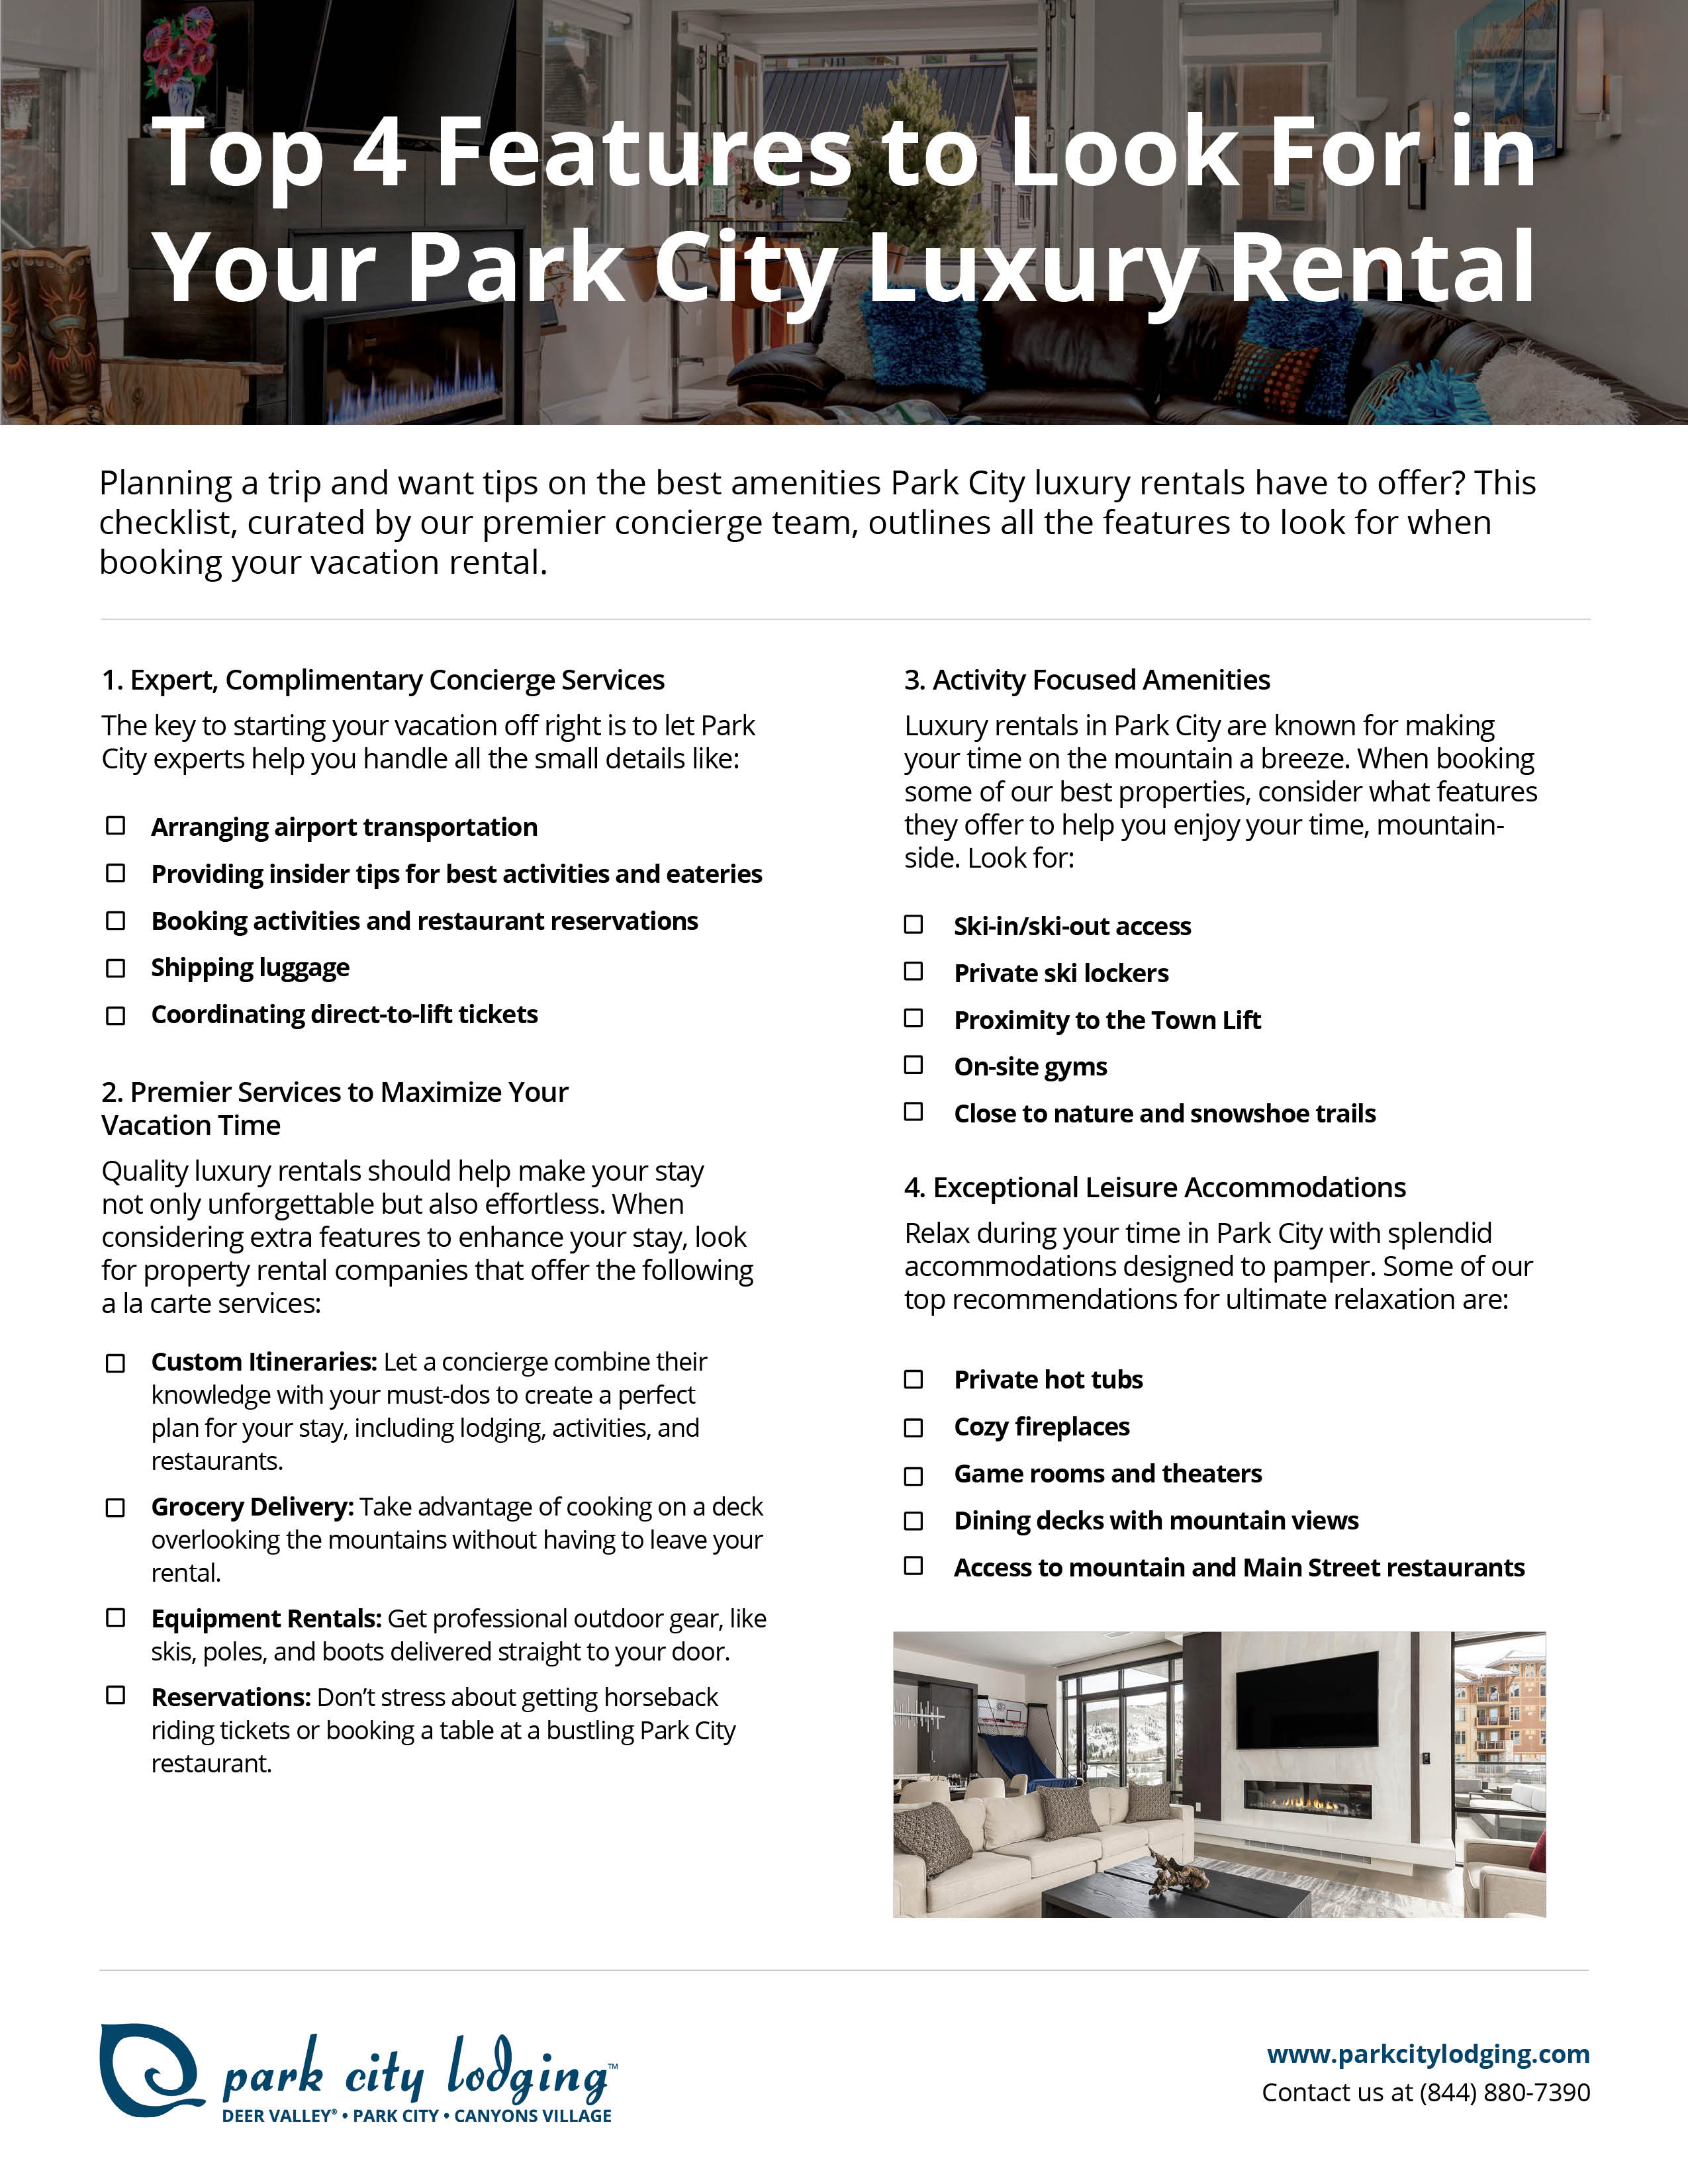 Checklist of features to look for in a luxury vacation rental in Park City.